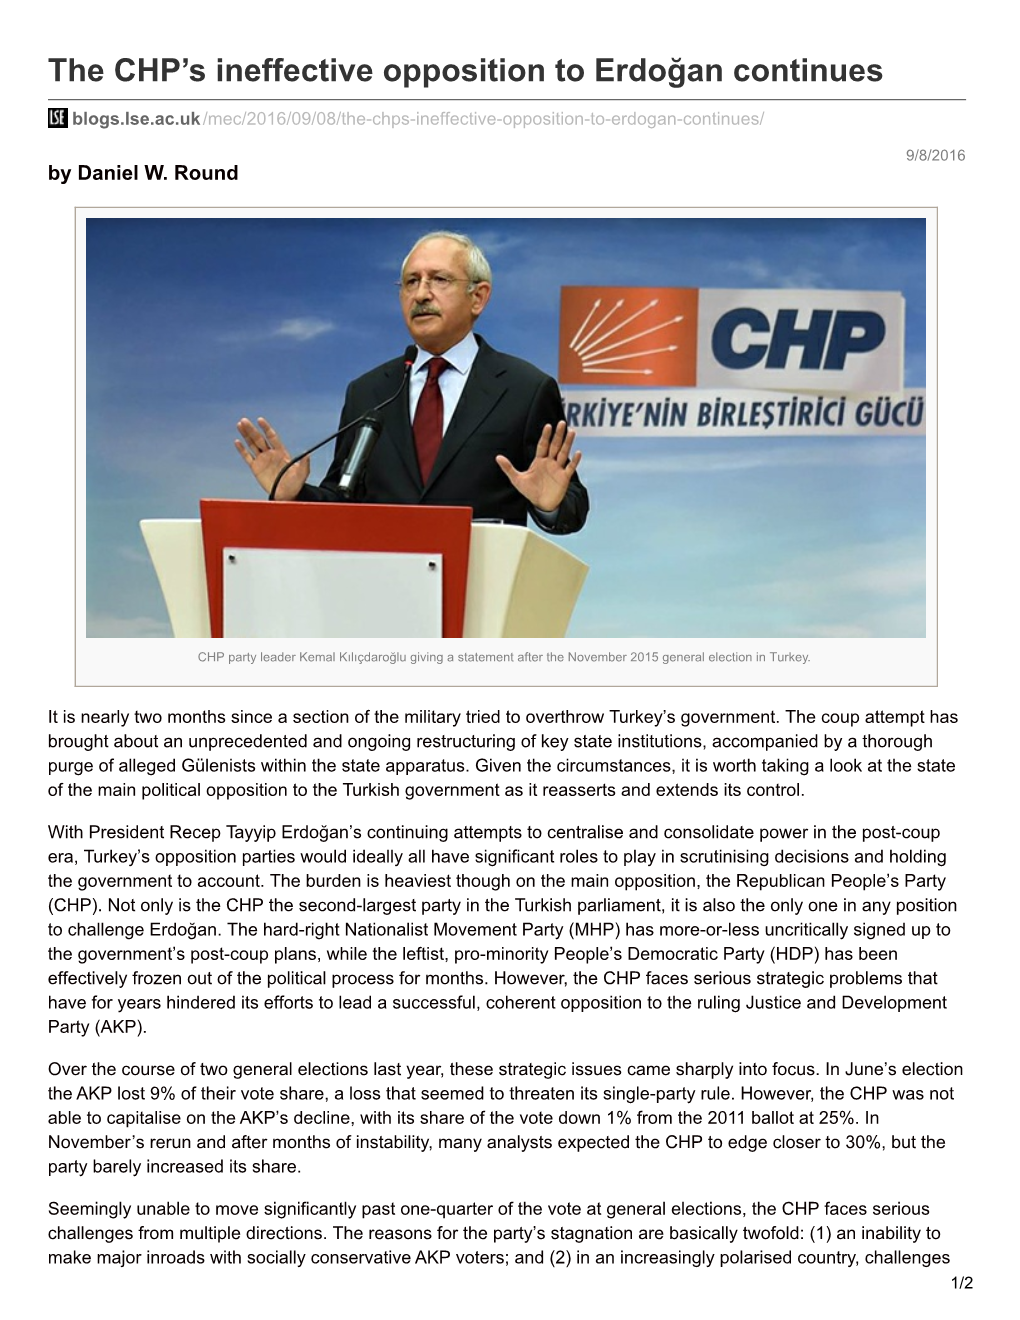 The CHP's Ineffective Opposition to Erdoğan Continues